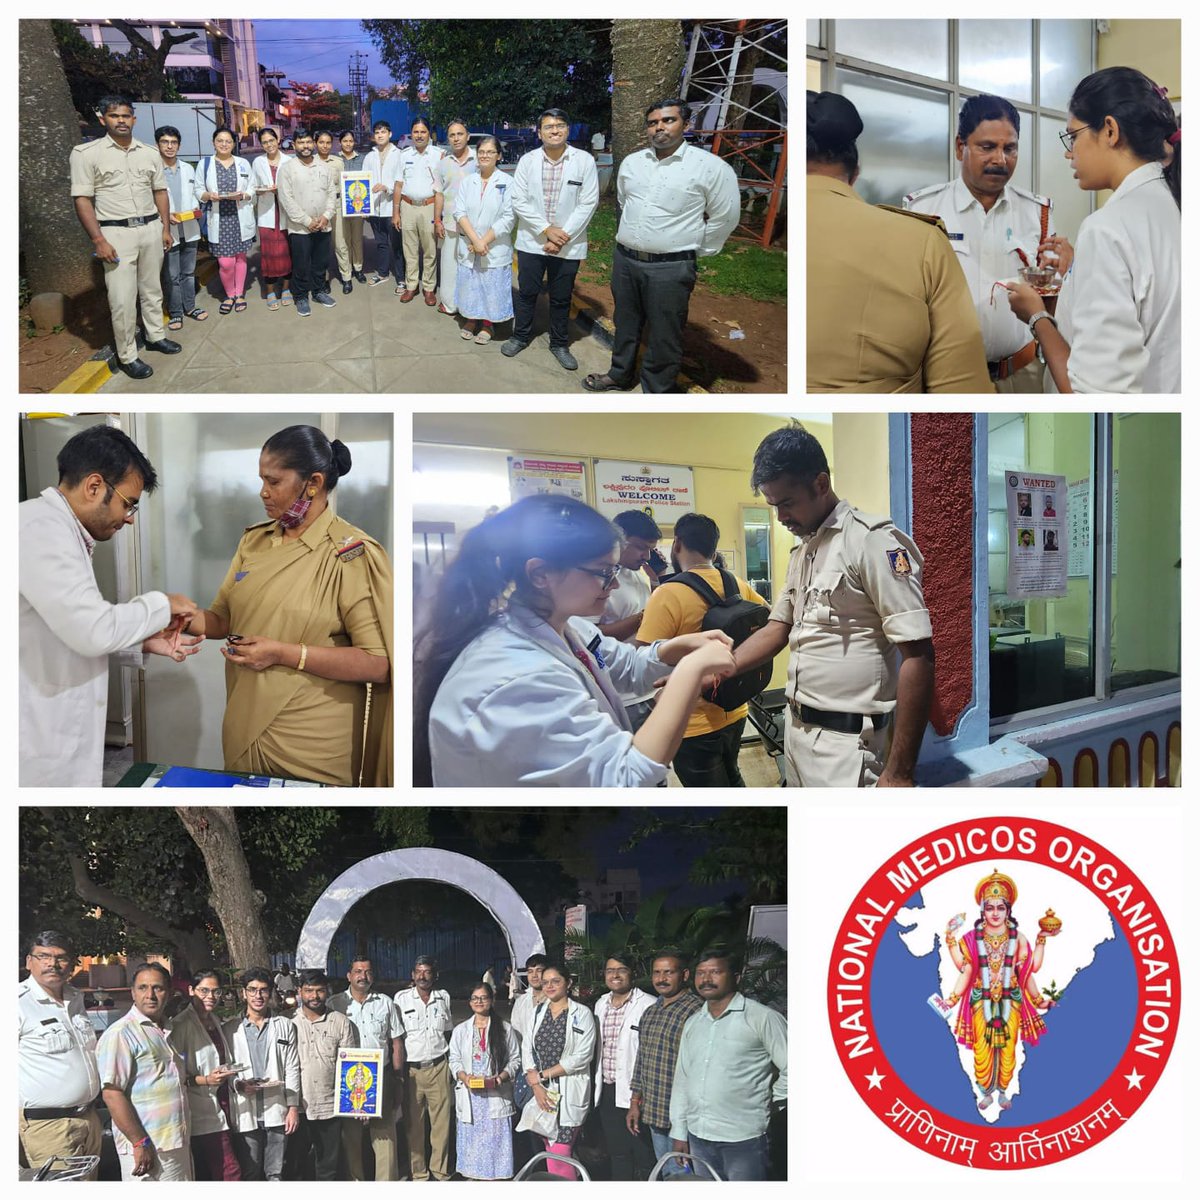 🎉 Celebrating #Rakshabandhan in a unique way at JSS Medical College, Mysore! Dr. Abhishek and students from National Medicos Organisation tied Rakhis on the hands of our dedicated police officers from Lakshmipuram and traffic police stations. 🚓❤️ #communityharmony